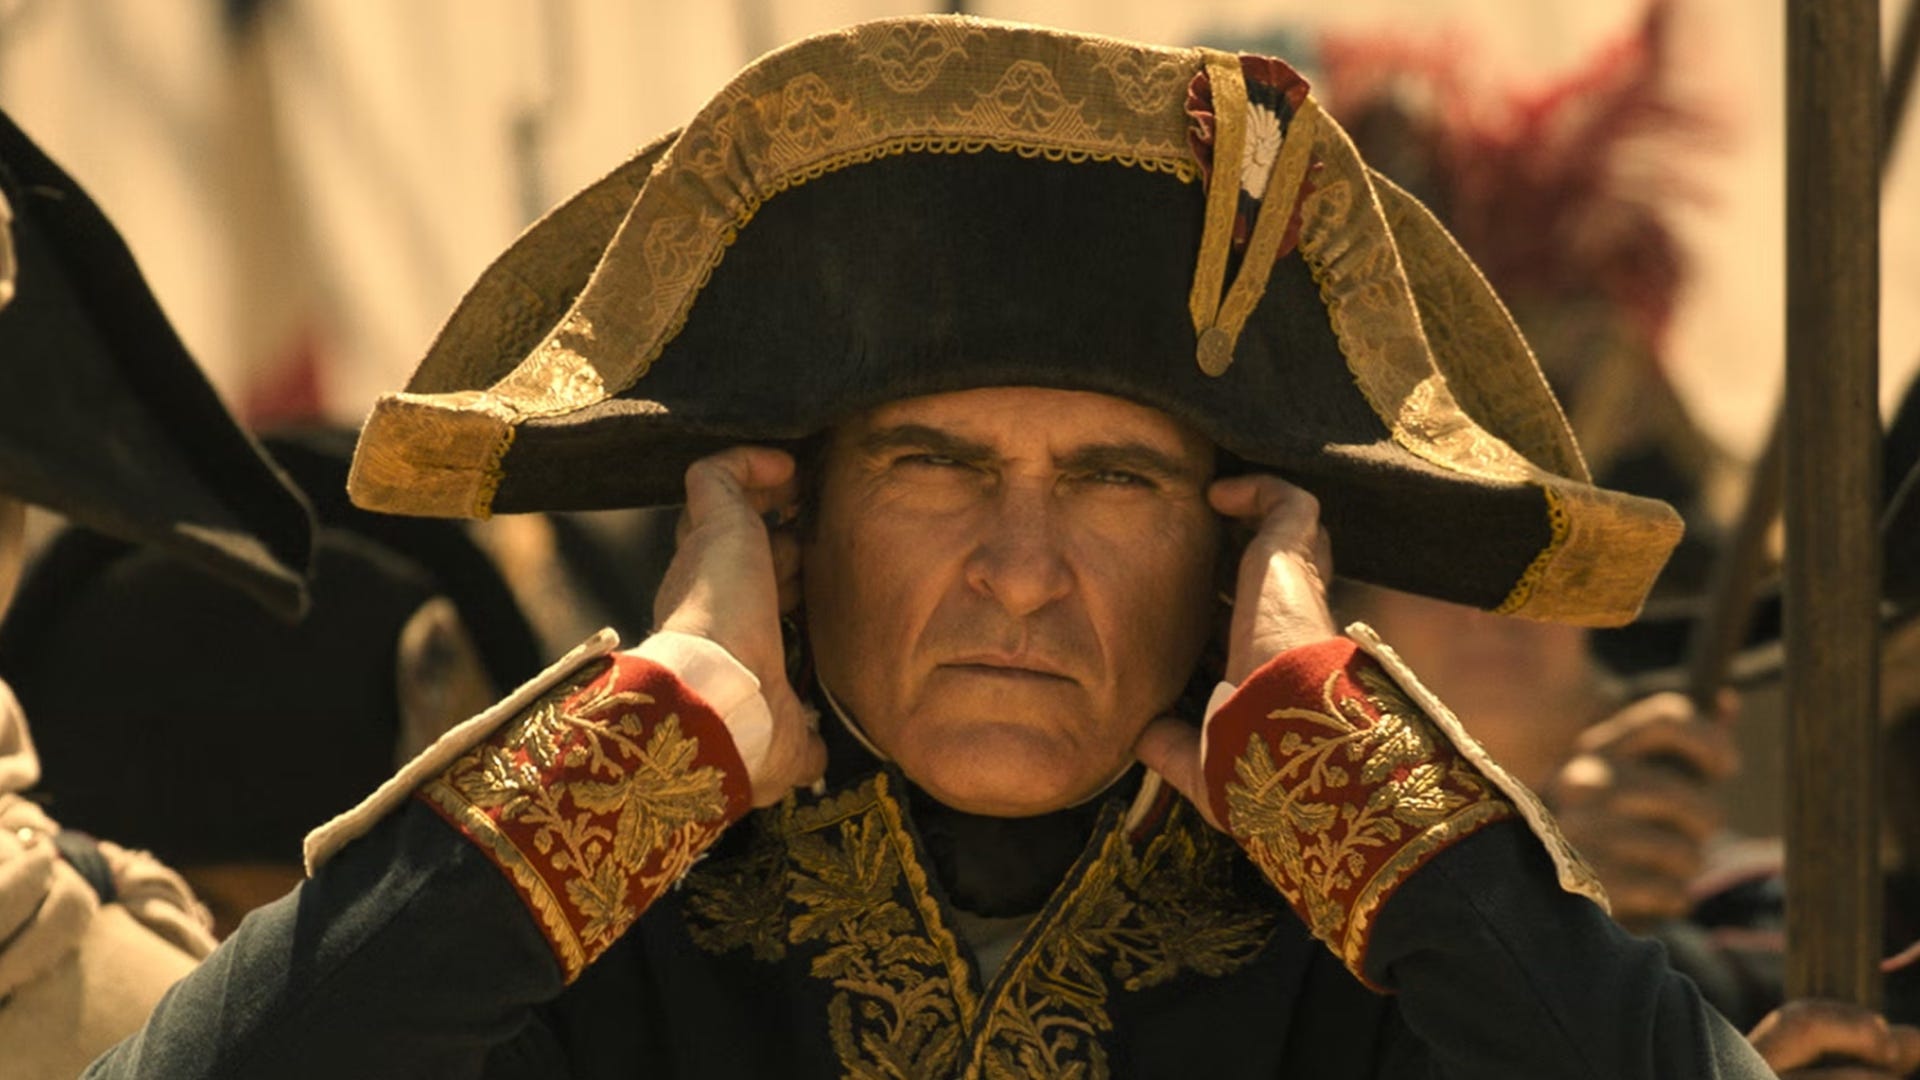 Brian Cox comes out with guns blazing and tears into Joaquin Phoenix's "truly terrible" Napoleon performance